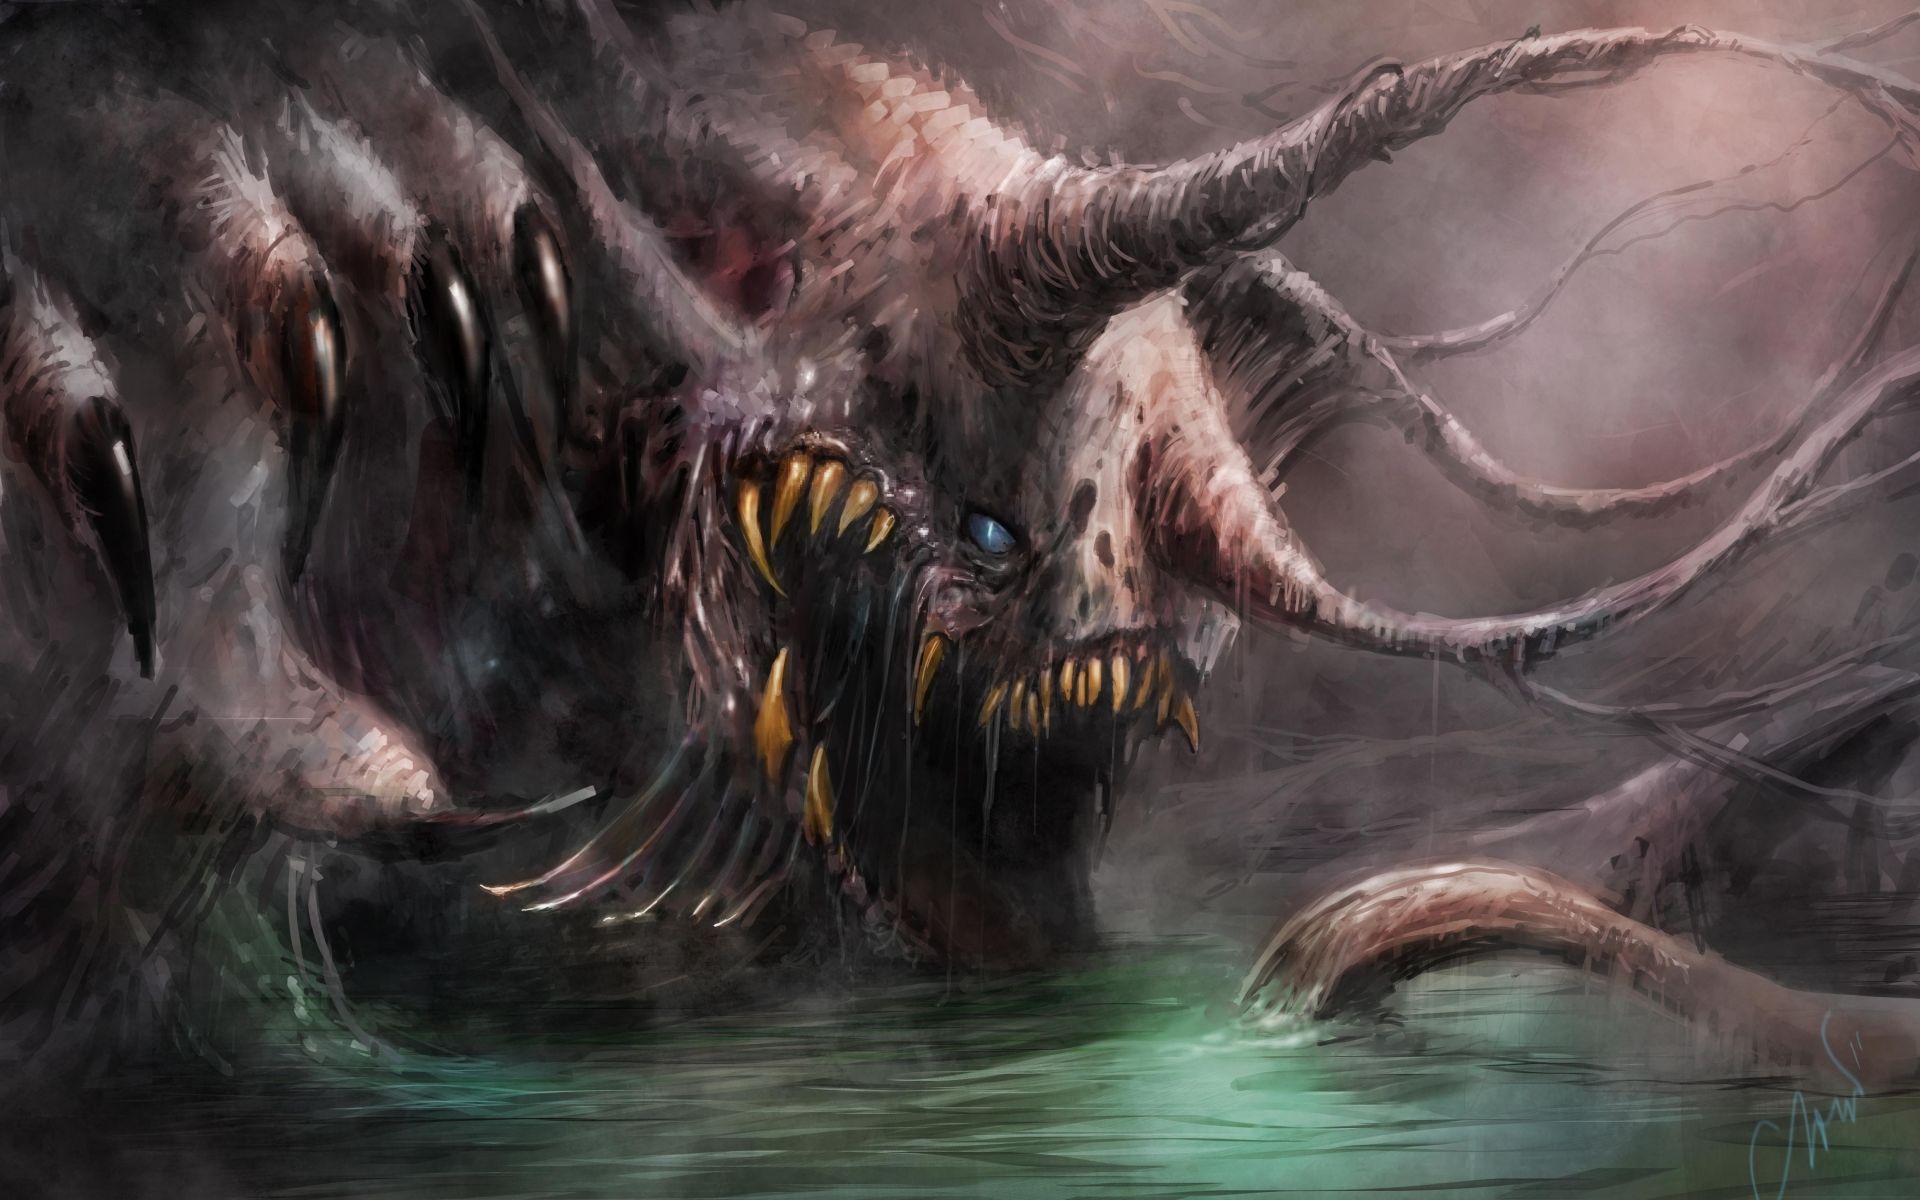 Scary Creepy Monsters. paintings landscapes illustrations fantasy